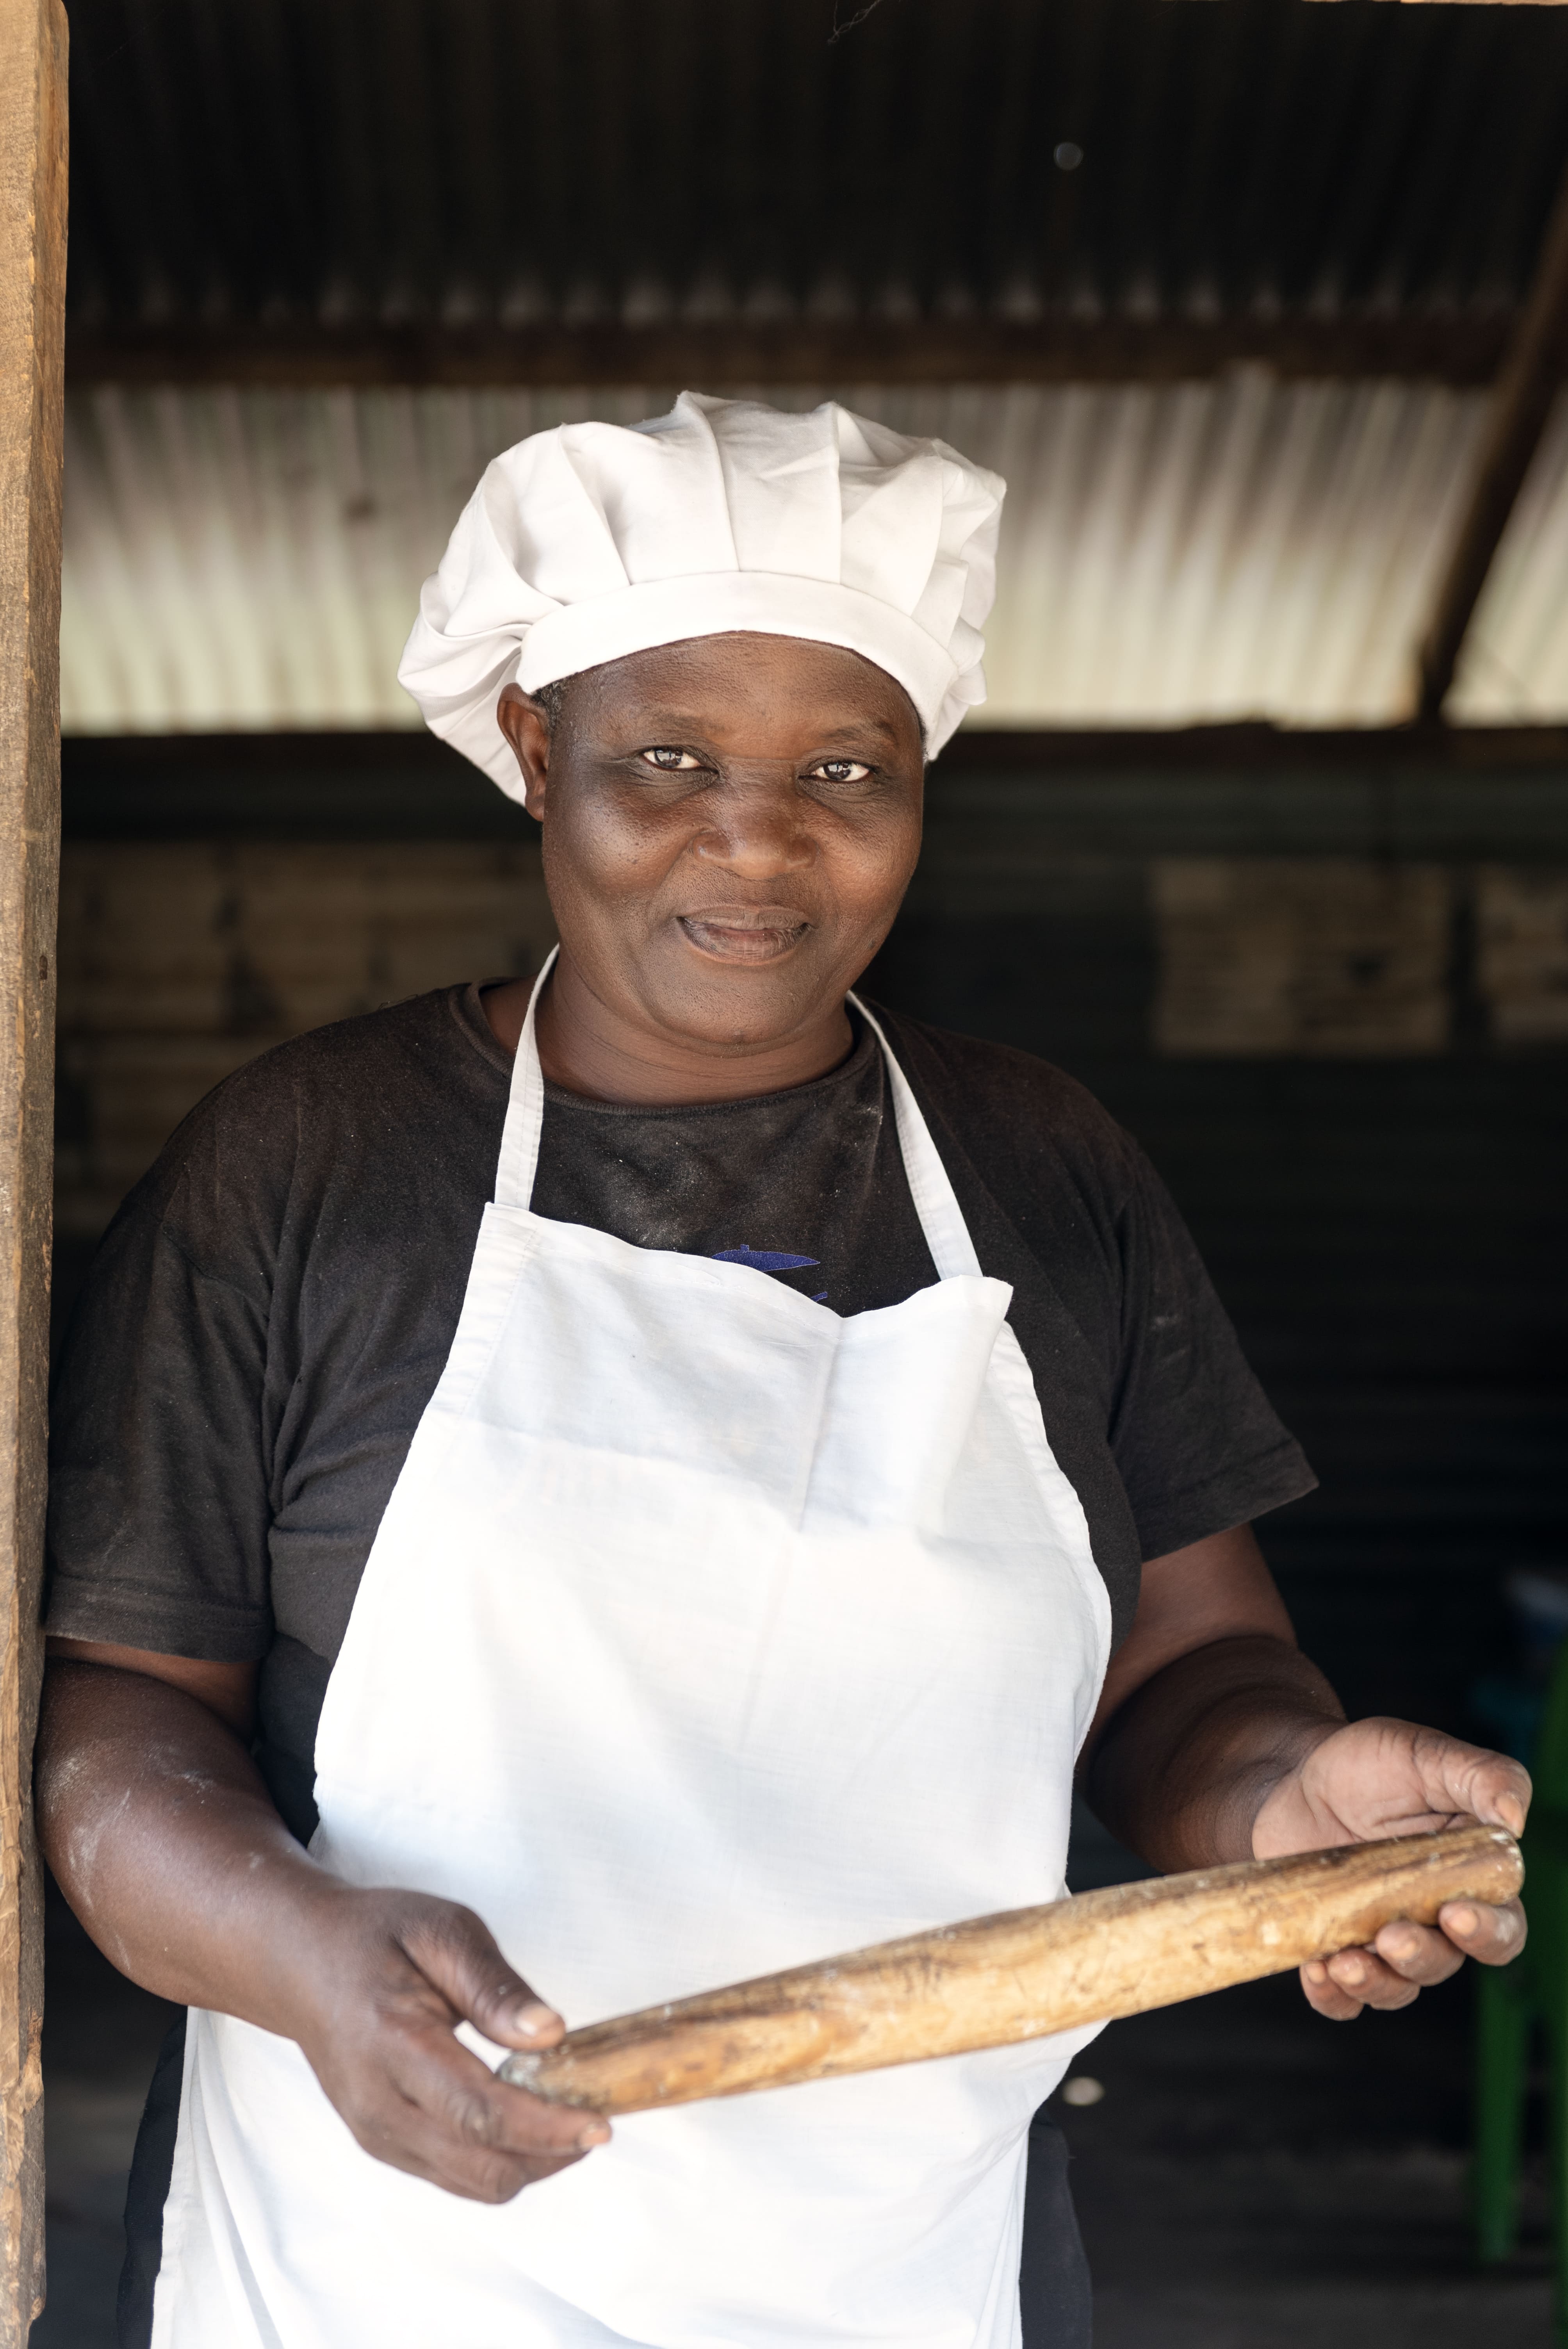 Lylian stands in her doorway, wearing an apron and a white cap, holding a loaf of bread. She is Breaking barriers to economic independence for people with disabilities.